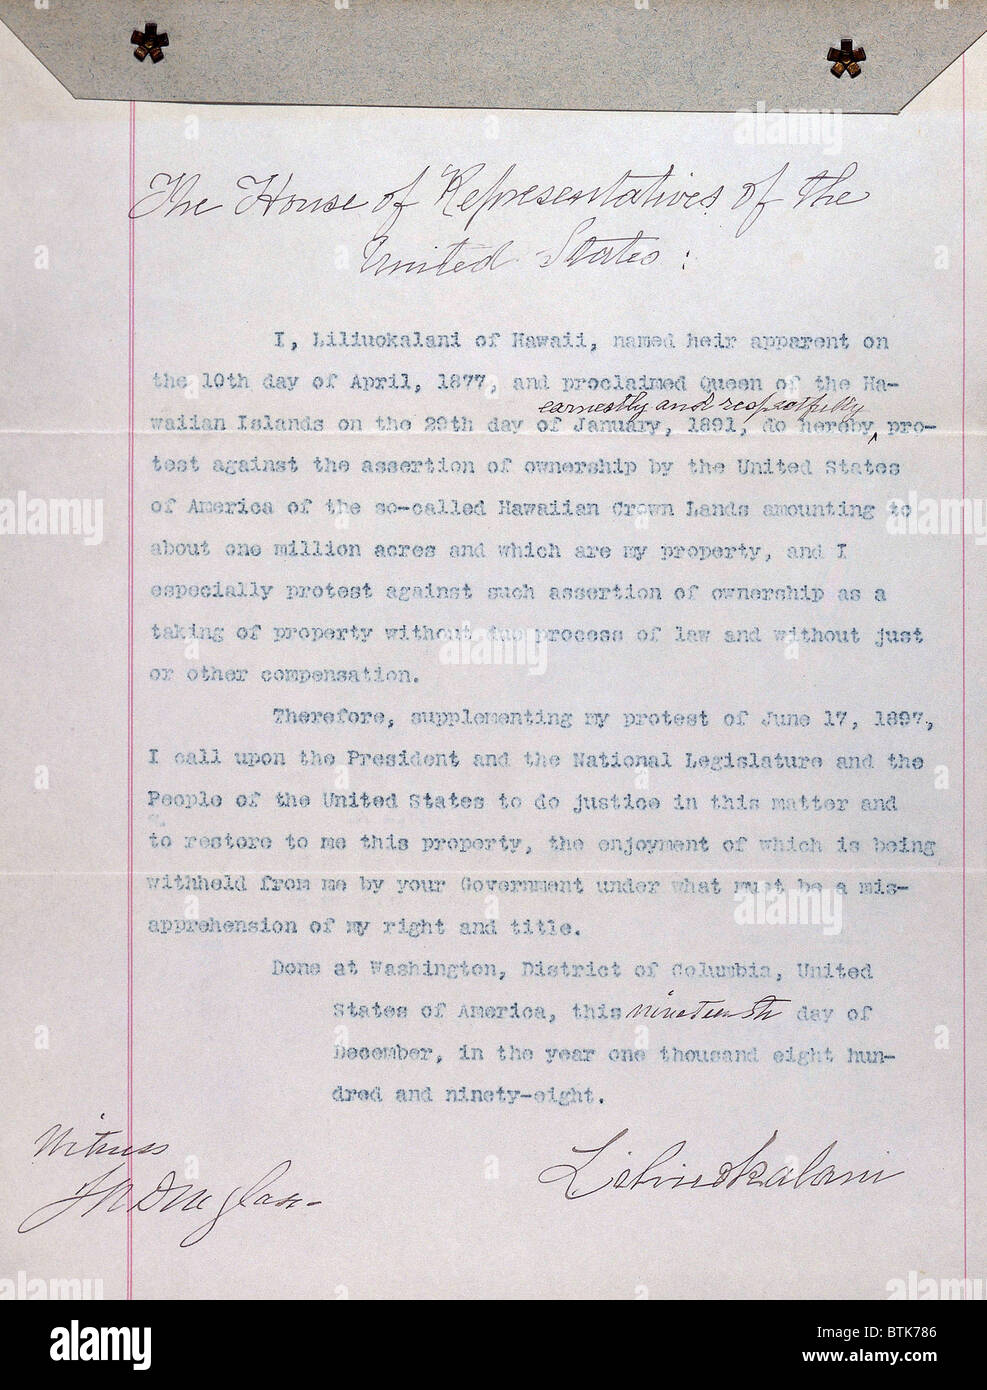 Hawaii. Letter from Liliuokalani, Queen of Hawaii to U.S. House of Representatives protesting U.S. assertion of ownership of Hawaii, December 19, 1898. Stock Photo